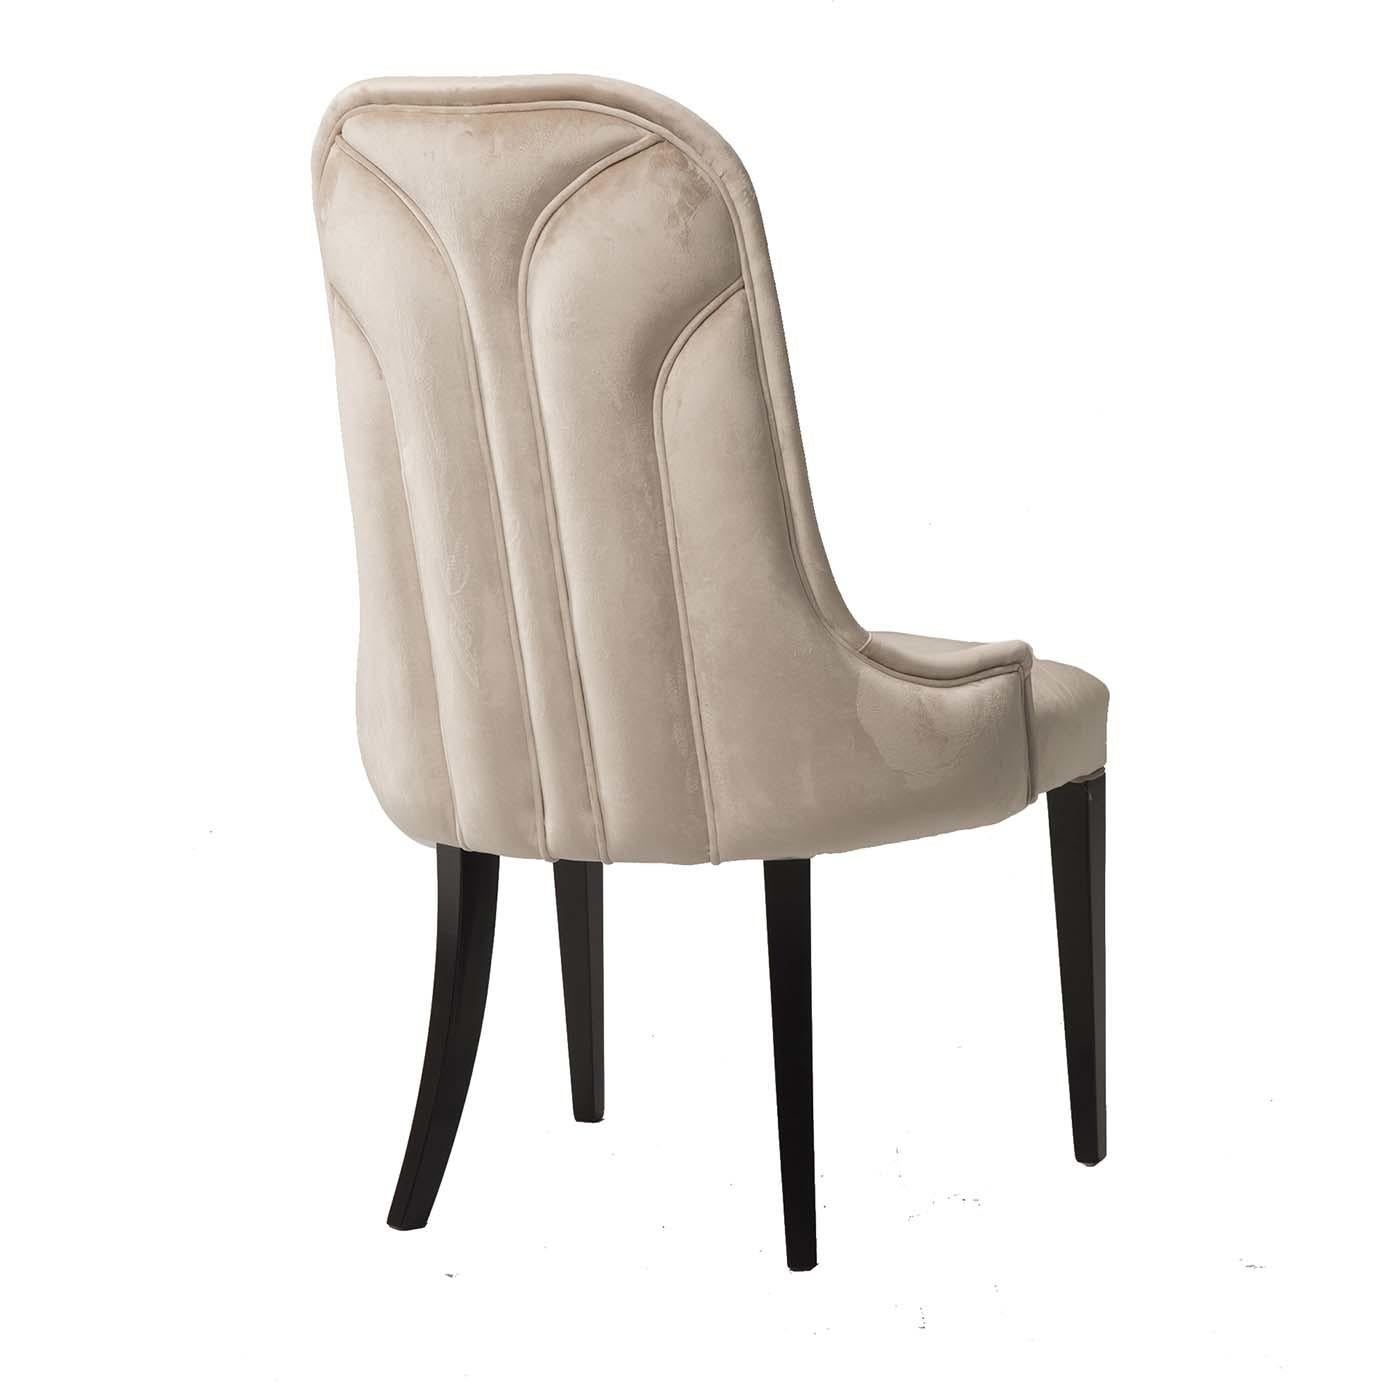 A wonderful addition to any decor with a modern and cosmopolitan flavor, this stylish Oscar collection wave chair combines tradition and modernity with a splendid design featuring sophisticated elements, such as wood of exceptional quality.